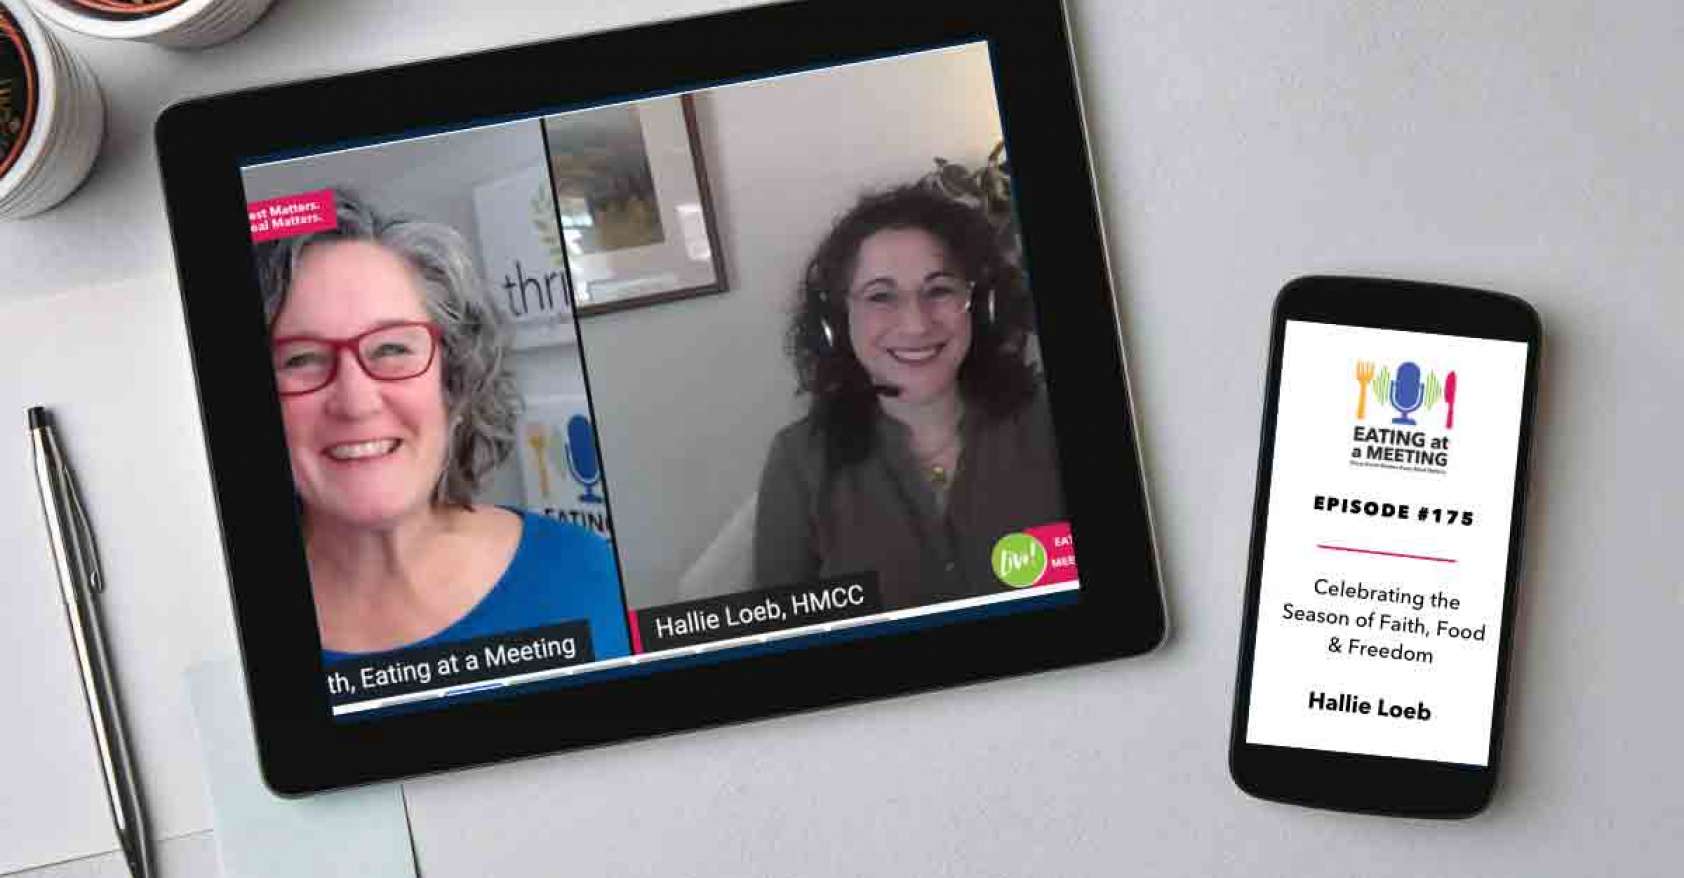 An iPad and iPhone on a table. On the iPad is a picture of two women who are on video screen. On the iPhone is the Eating at a Meeting podcast logo with Episode #175 Celebrating the Season of Faith, Food & Freedom with Hallie Loeb.